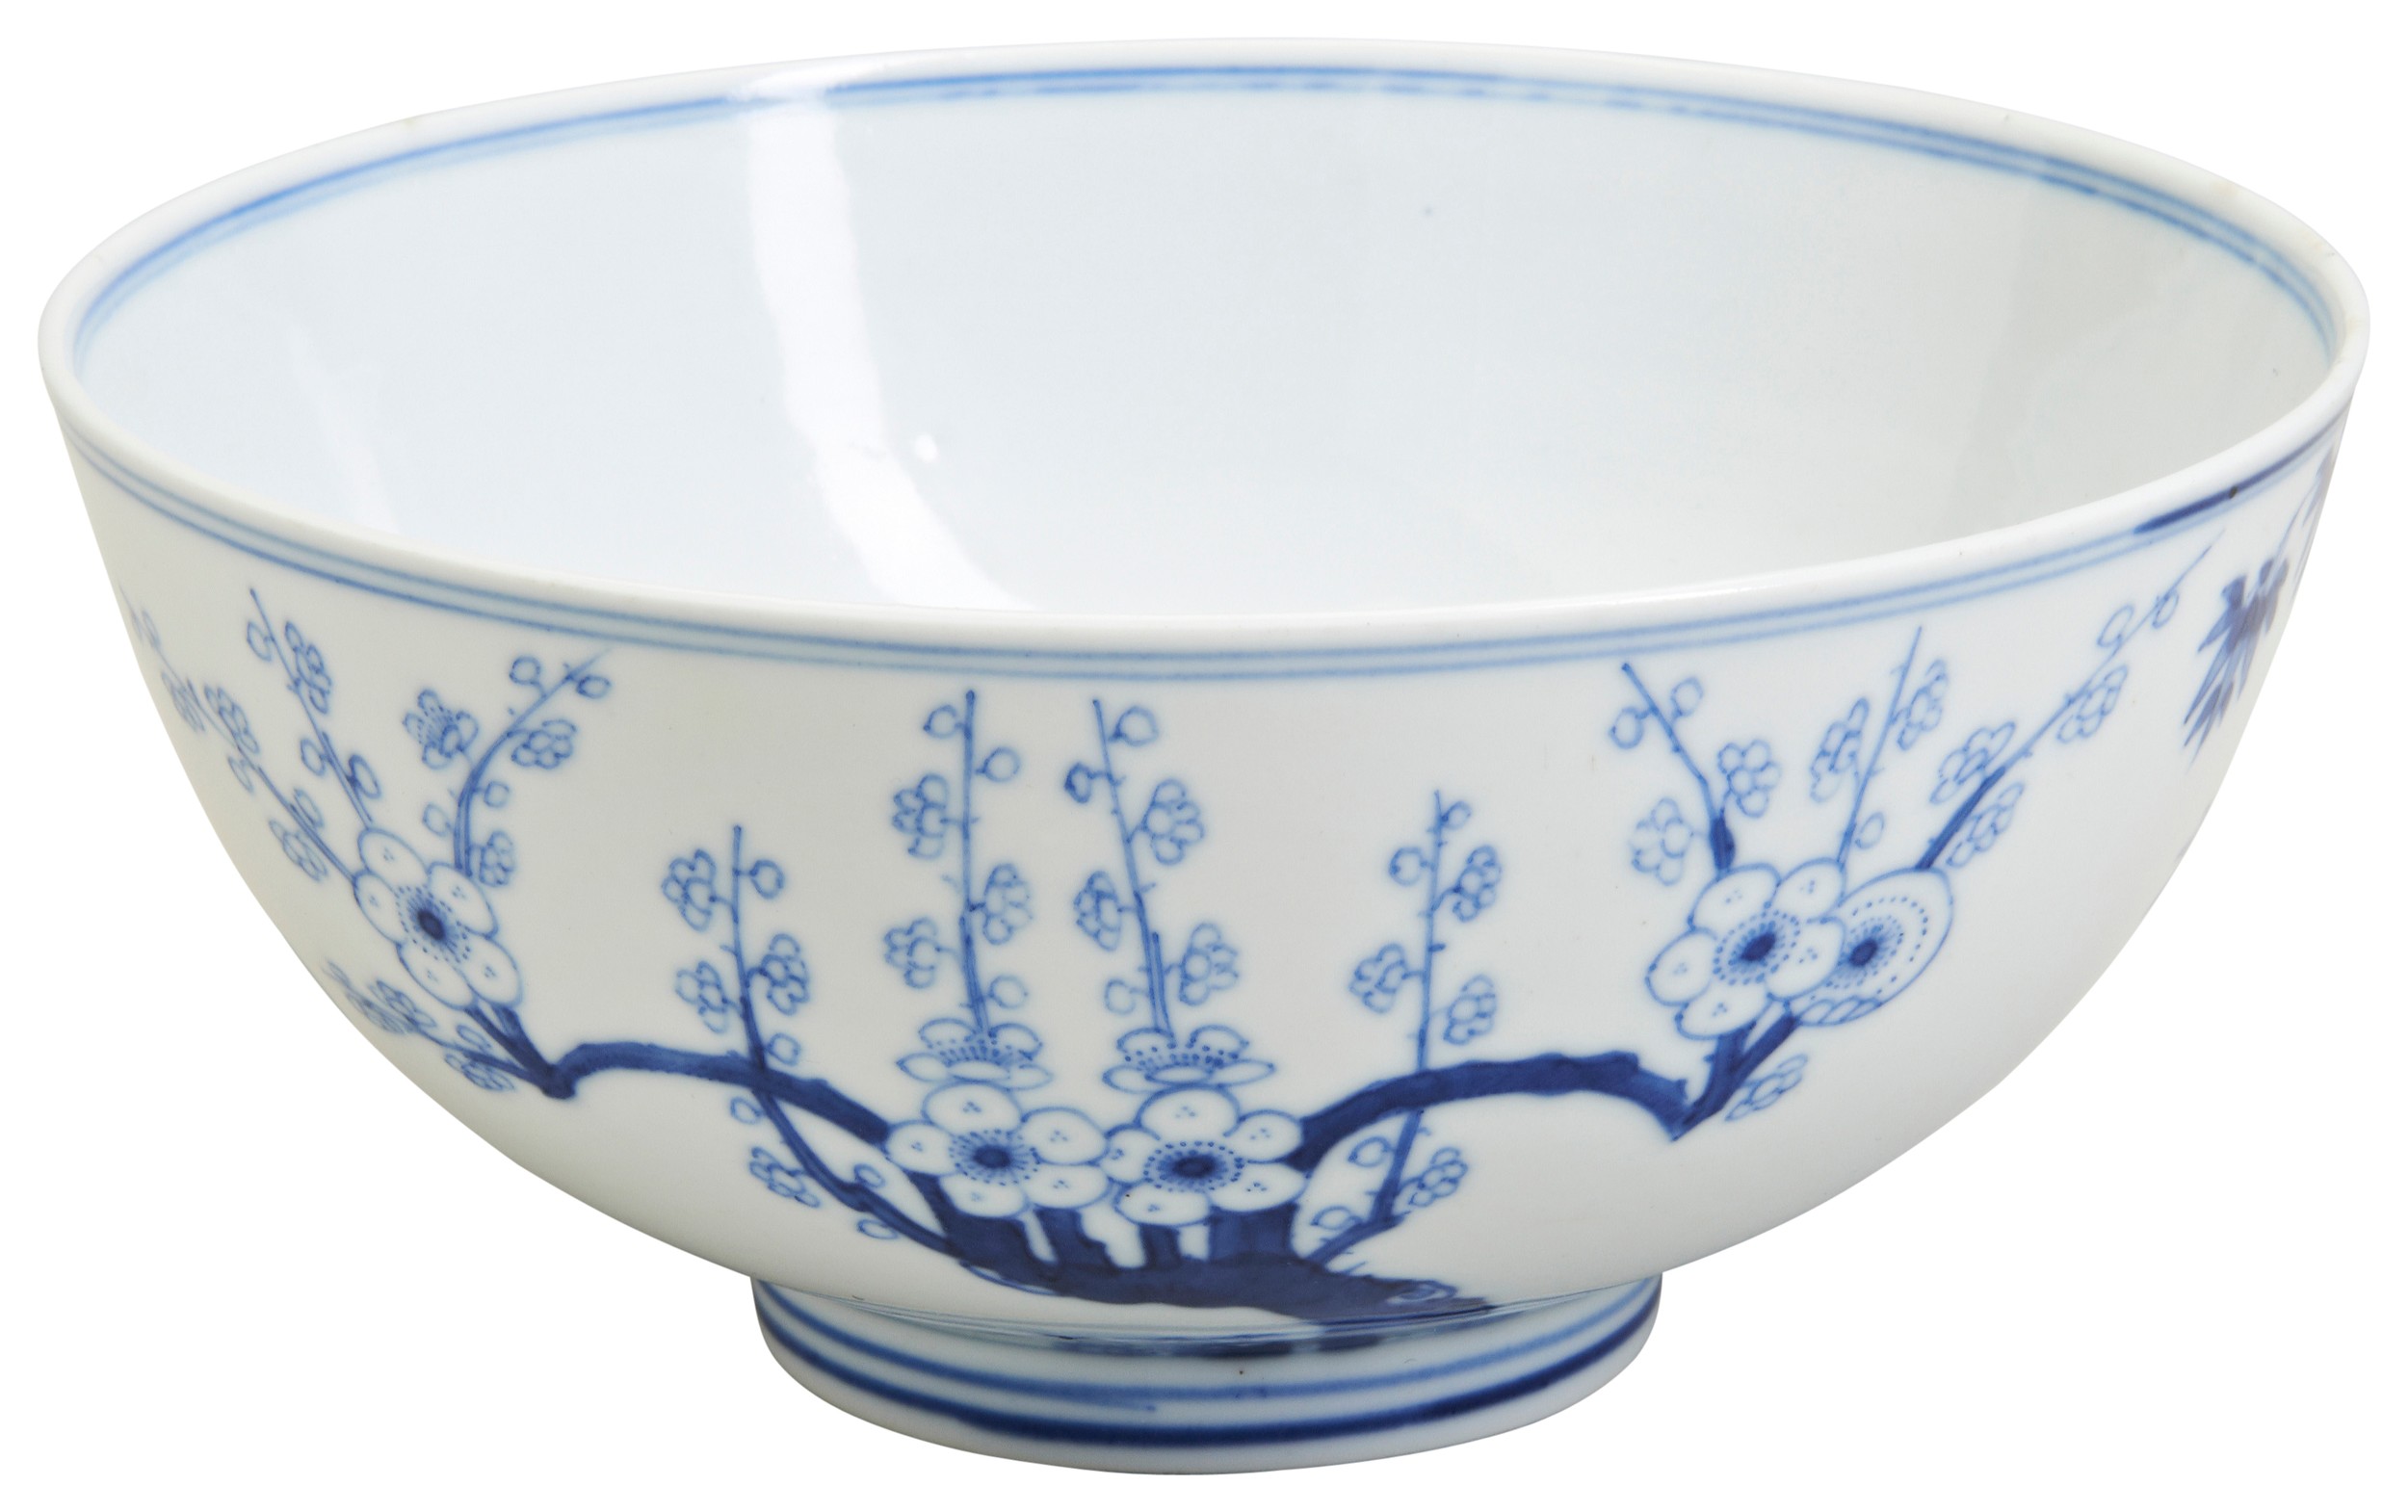 A BLUE AND WHITE 'THREE FRIENDS OF WINTER' BOWL GUANGXU SIX CHARACTER MARK AND PERIOD 清光绪 青花岁寒三友碗